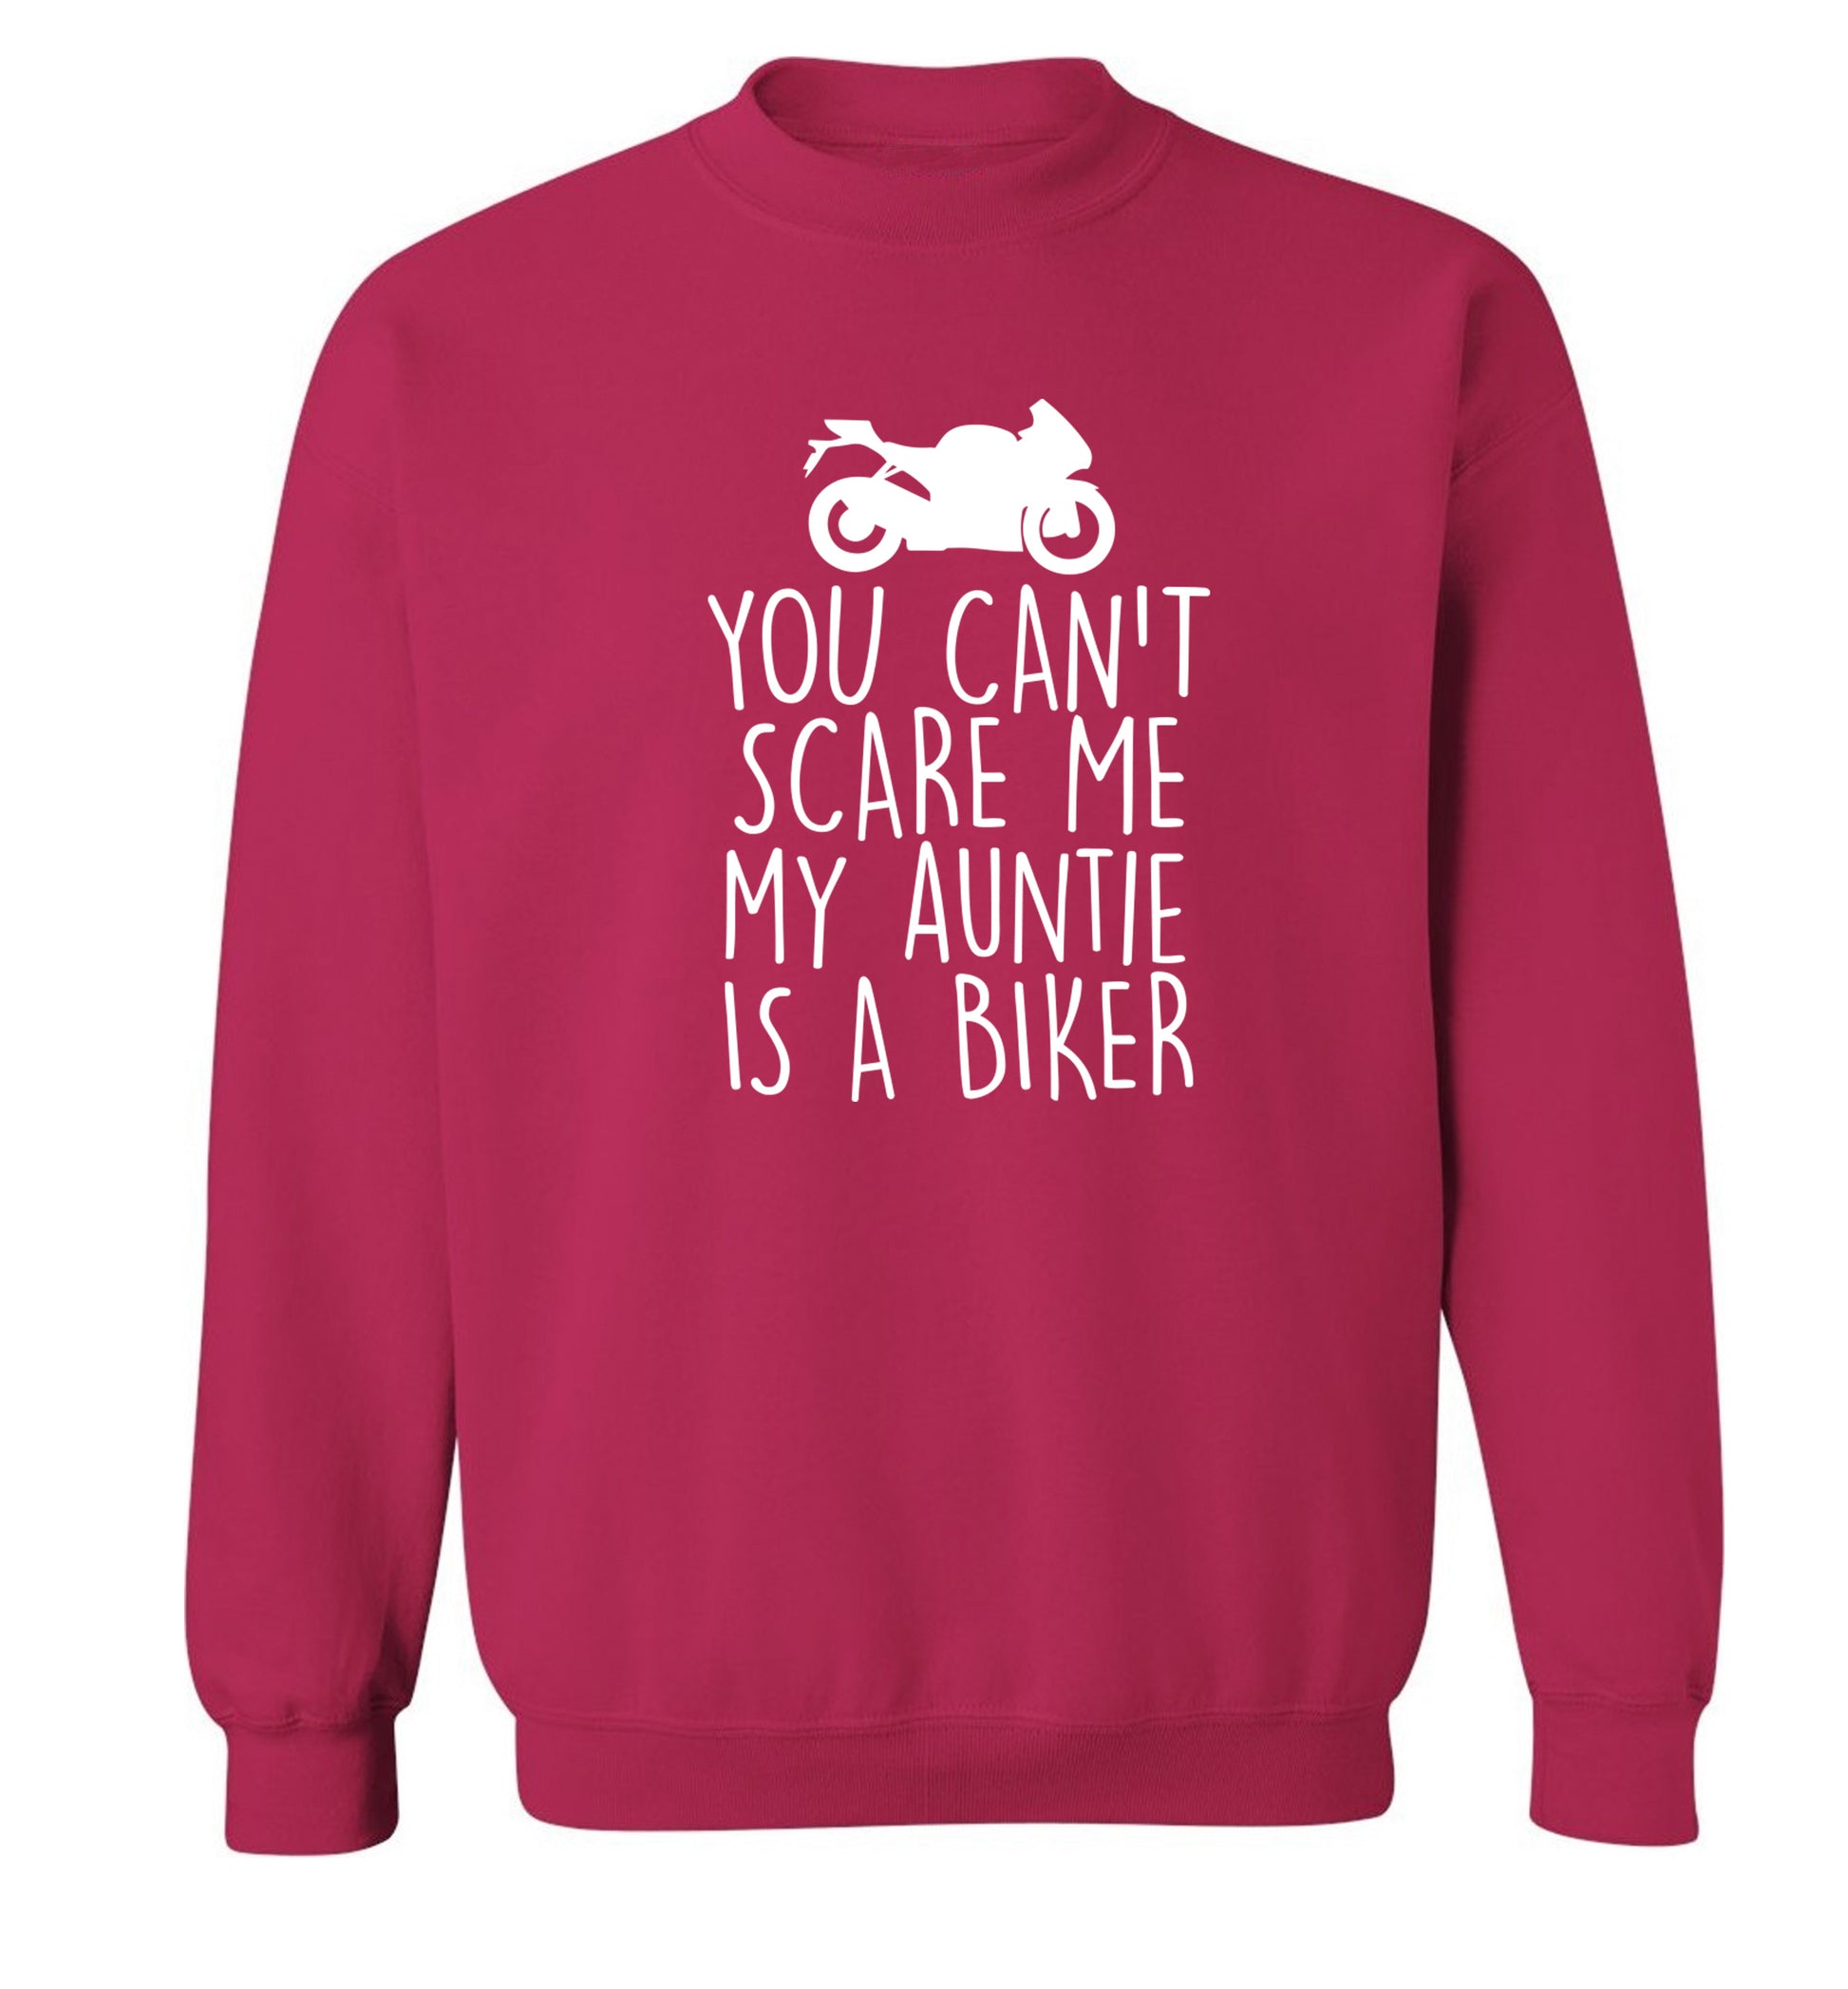 You can't scare me my auntie is a biker Adult's unisex pink Sweater 2XL